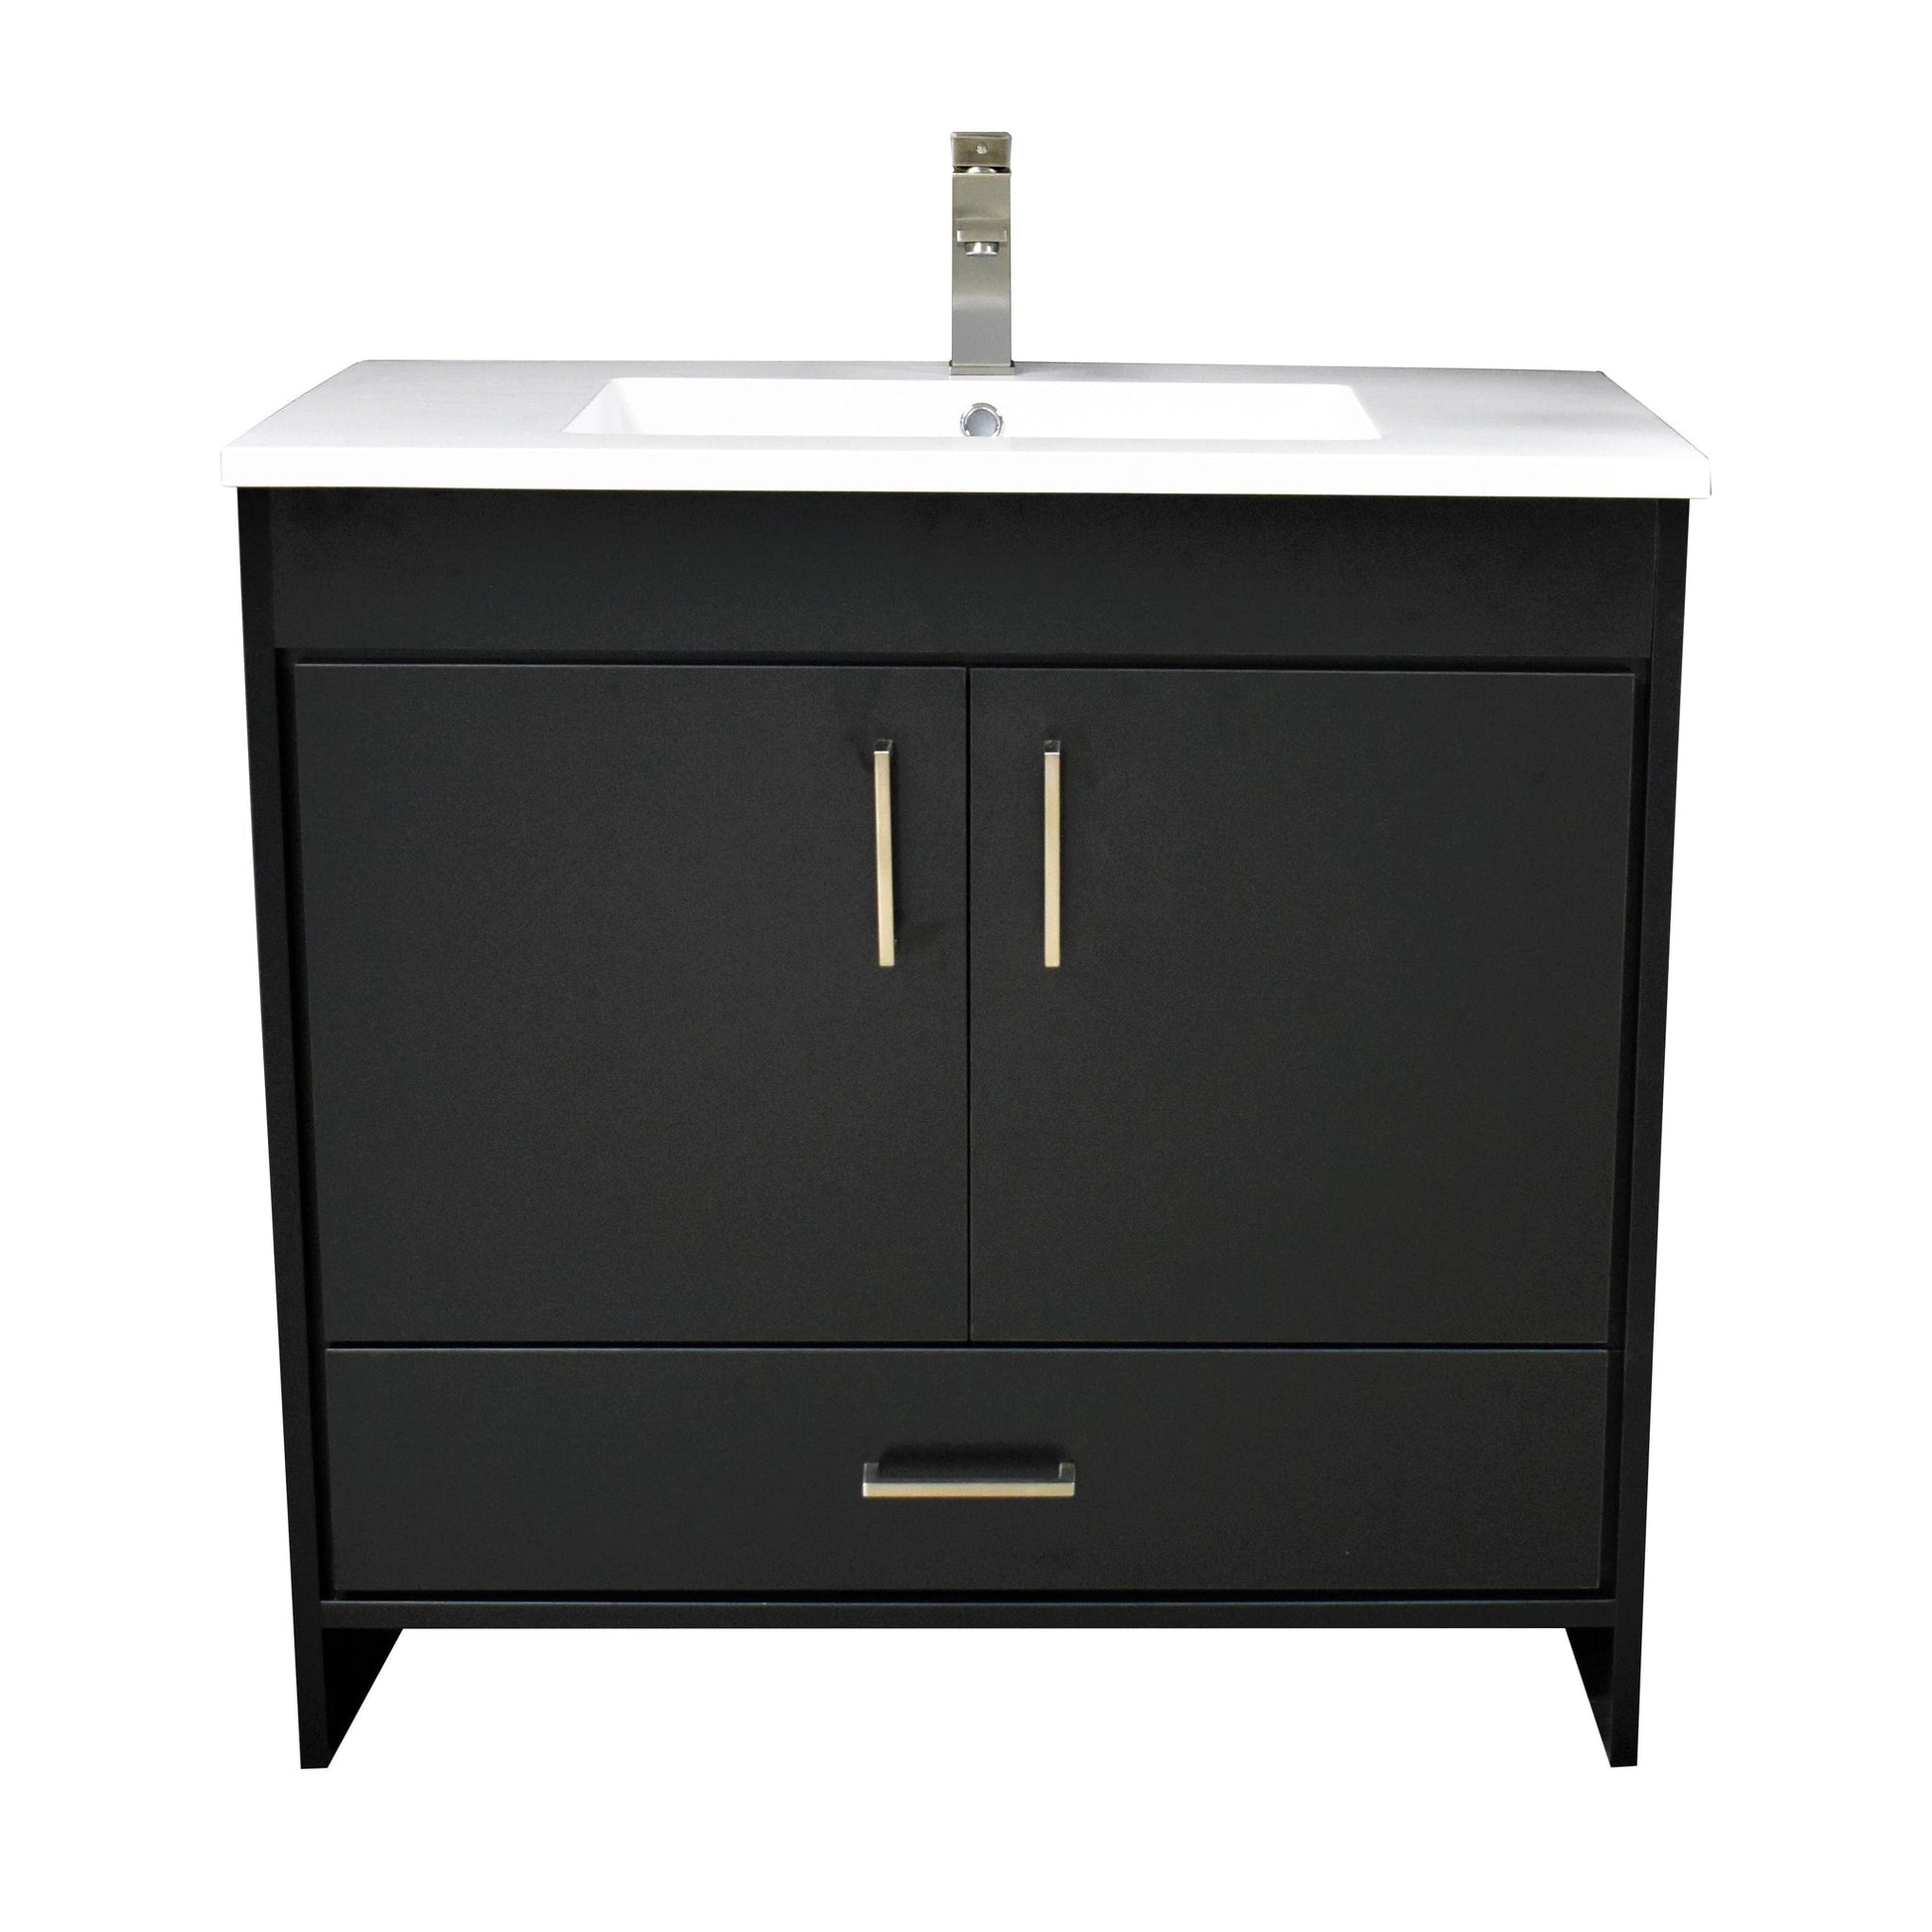 Volpa USA Rio 36" Black Freestanding Modern Bathroom Vanity With Integrated Acrylic Top and Brushed Nickel Handles